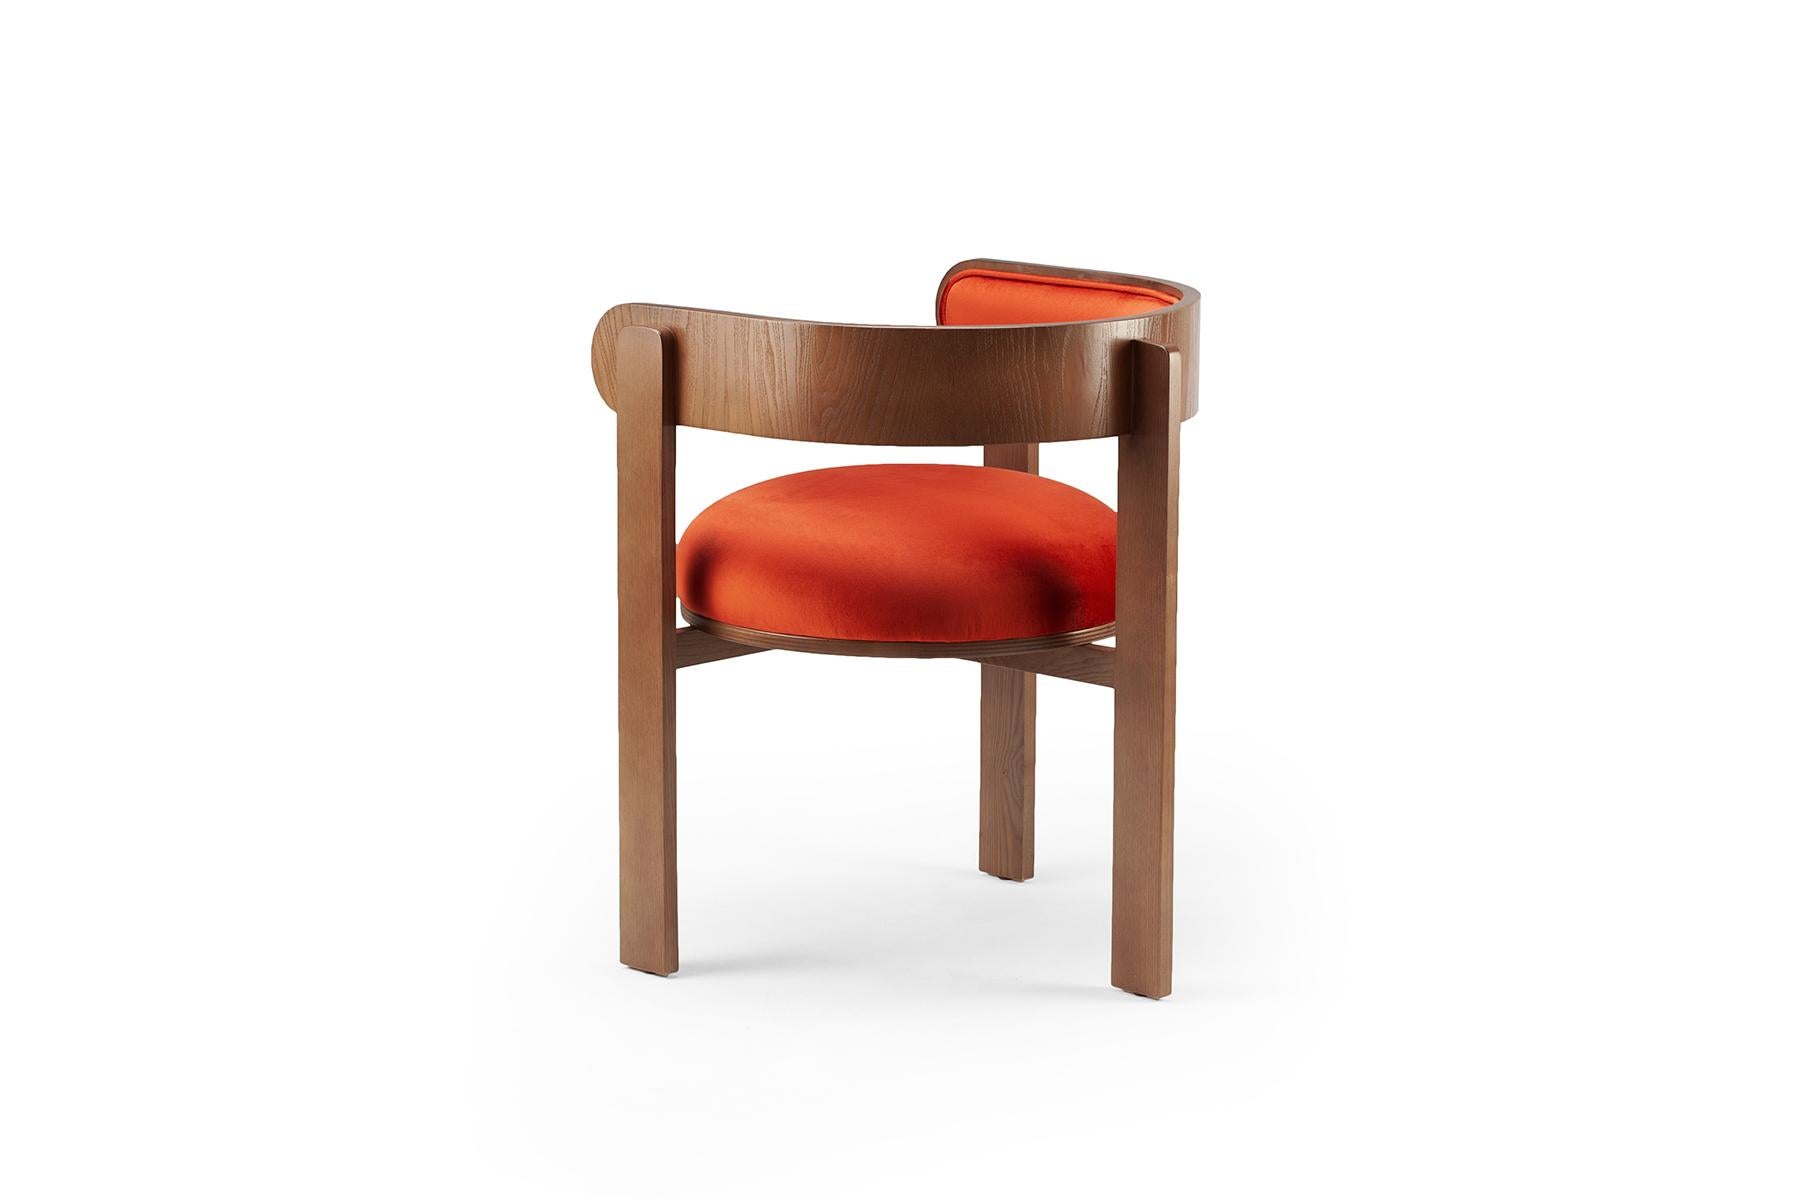 The clean and sensual lines of the Moulin chair make this piece a comfortable and exuberant one, adorned with piping and a bent wood structure which frames a perfectly round seat. Moulin chair invites guests with its fun and flirtatious feel,